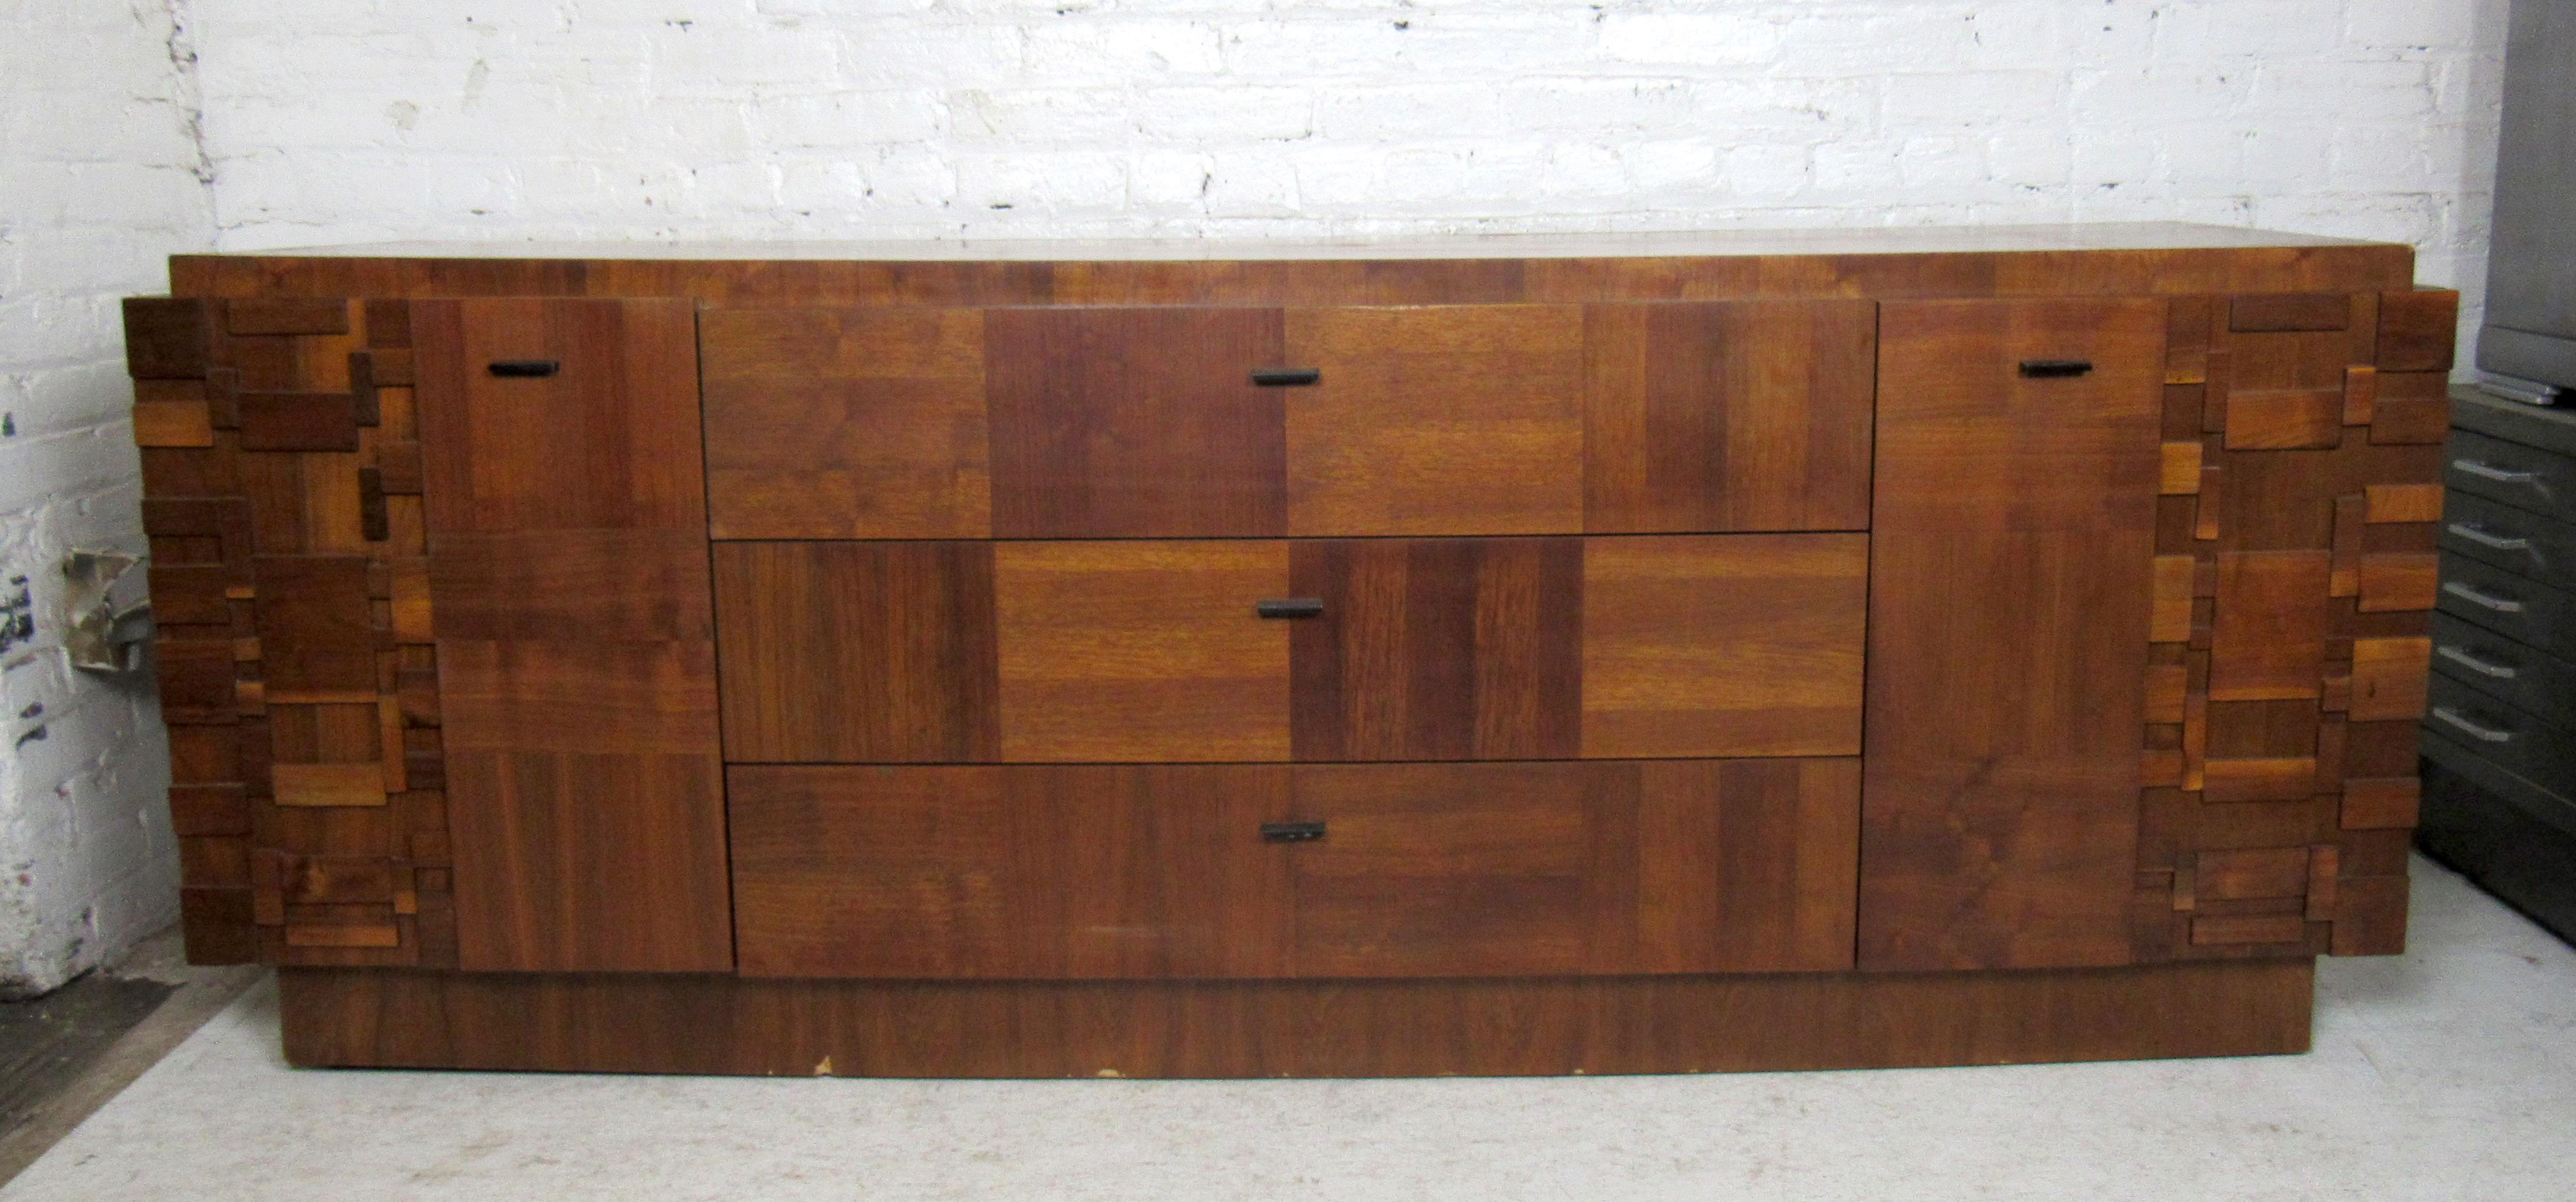 This unique lane dresser combines stylish Brutalist detail with nine spacious drawers for storage. From the staccato line, this wonderful design is perfect for any setting.
Please confirm item location (NJ or BK).